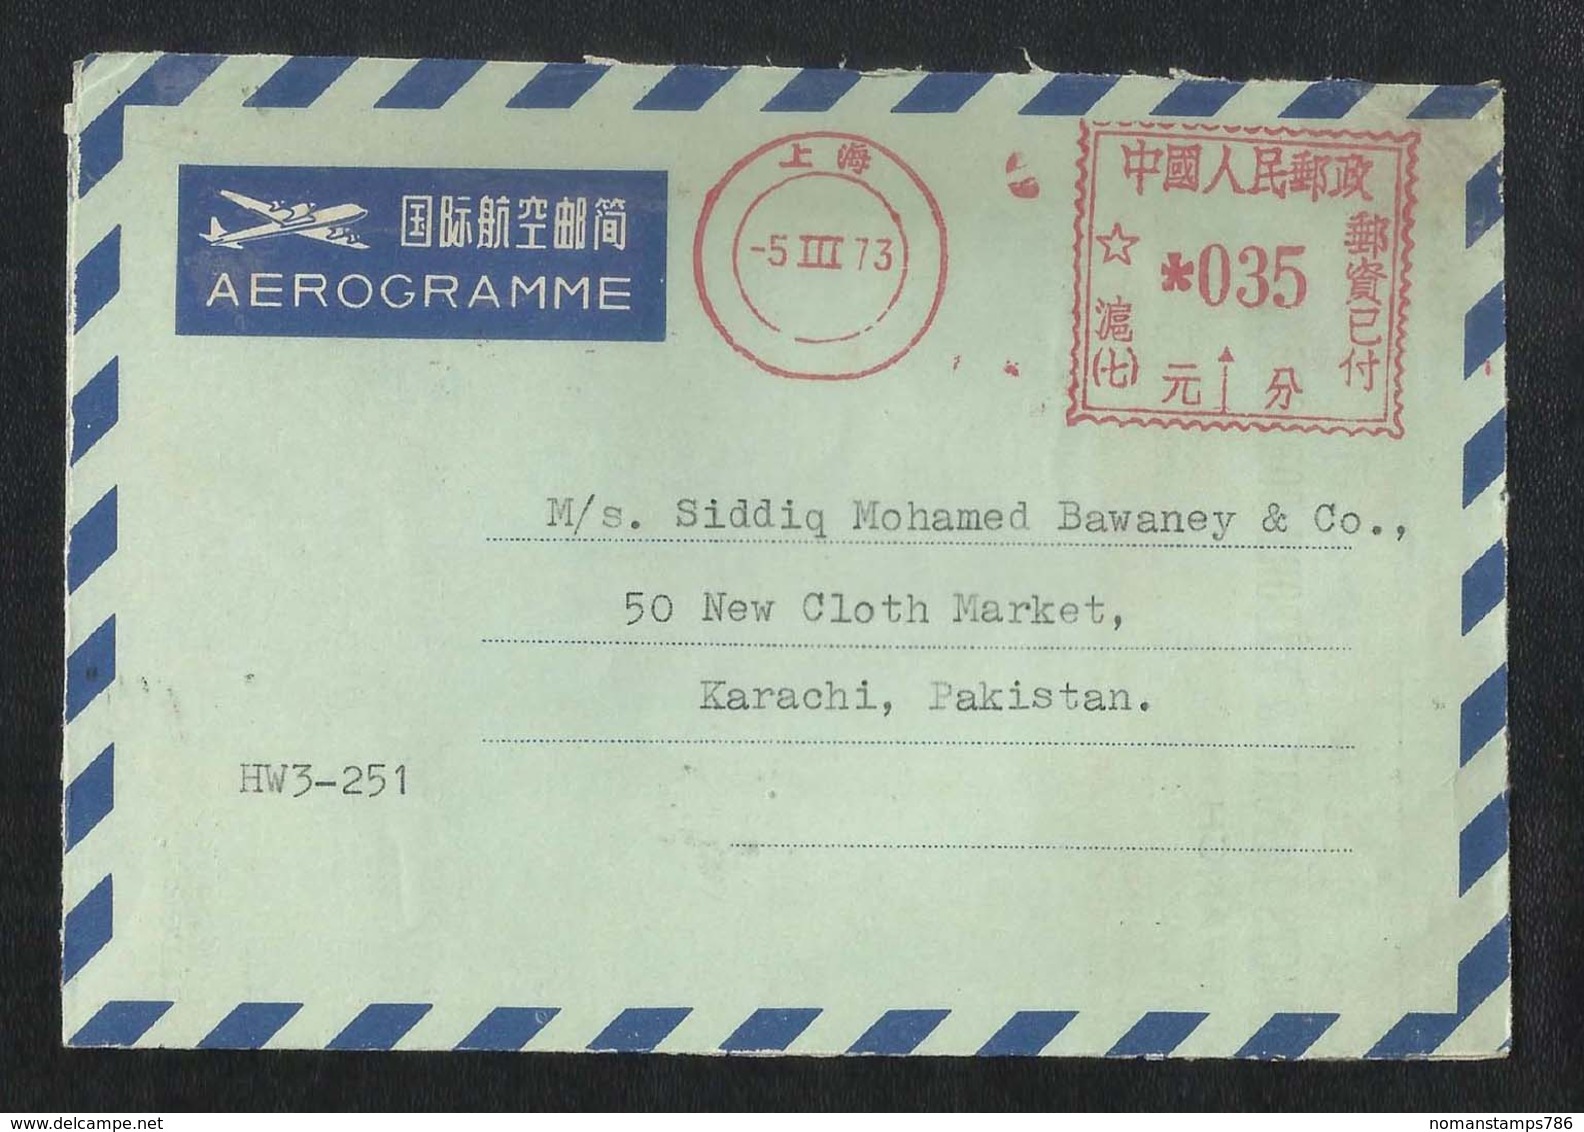 China 1973 Meter Mark Air Mail Postal Used Aerogramme Cover Chine To Pakistan - Covers & Documents